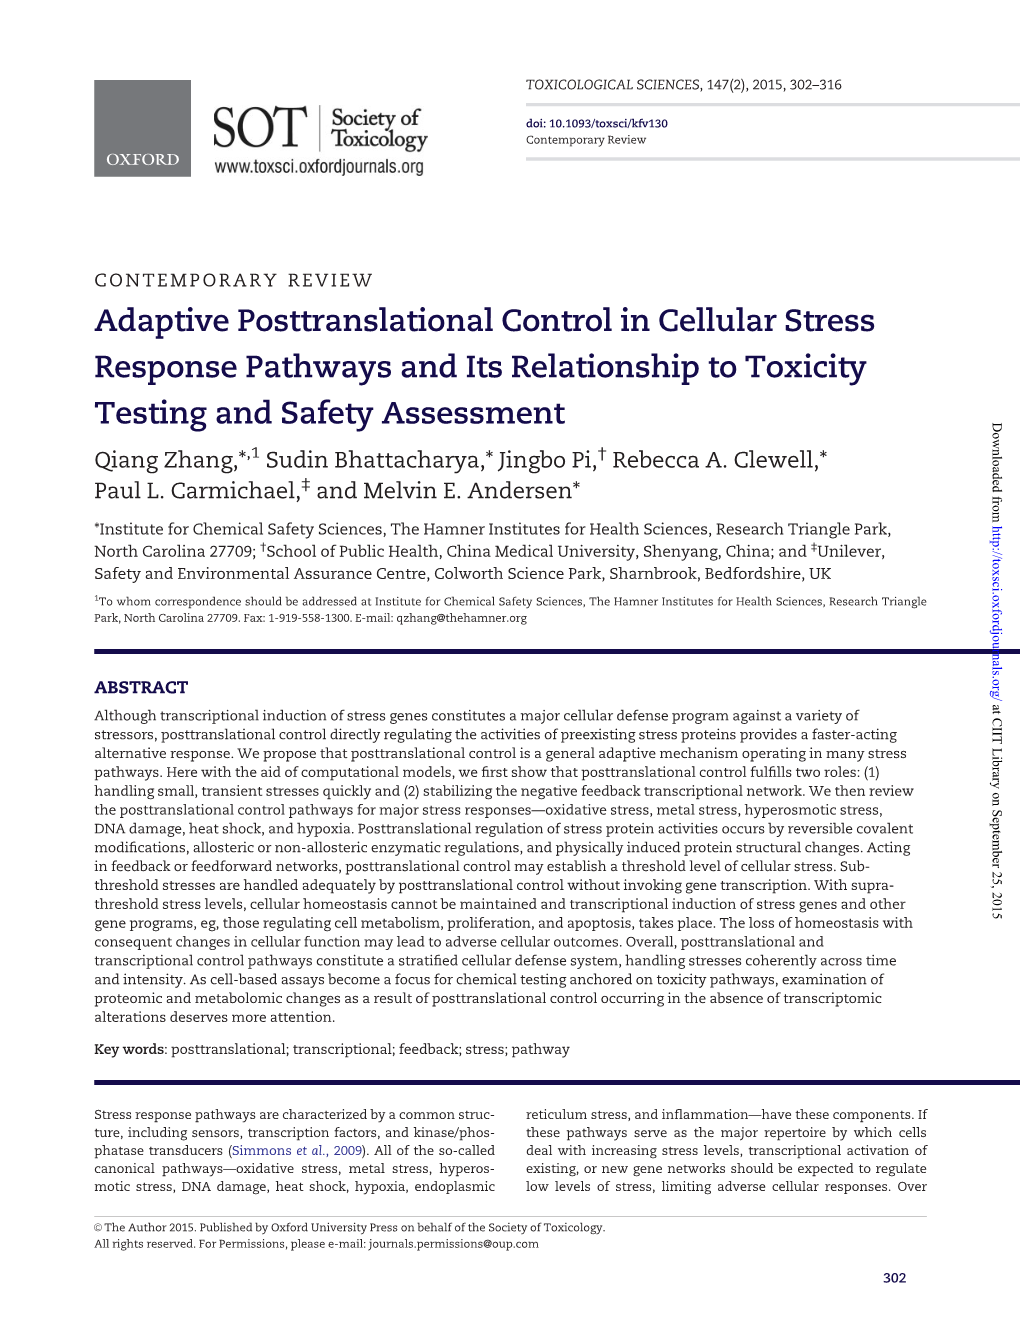 Adaptive Posttranslational Control in Cellular Stress Response Pathways and Its Relationship to Toxicity